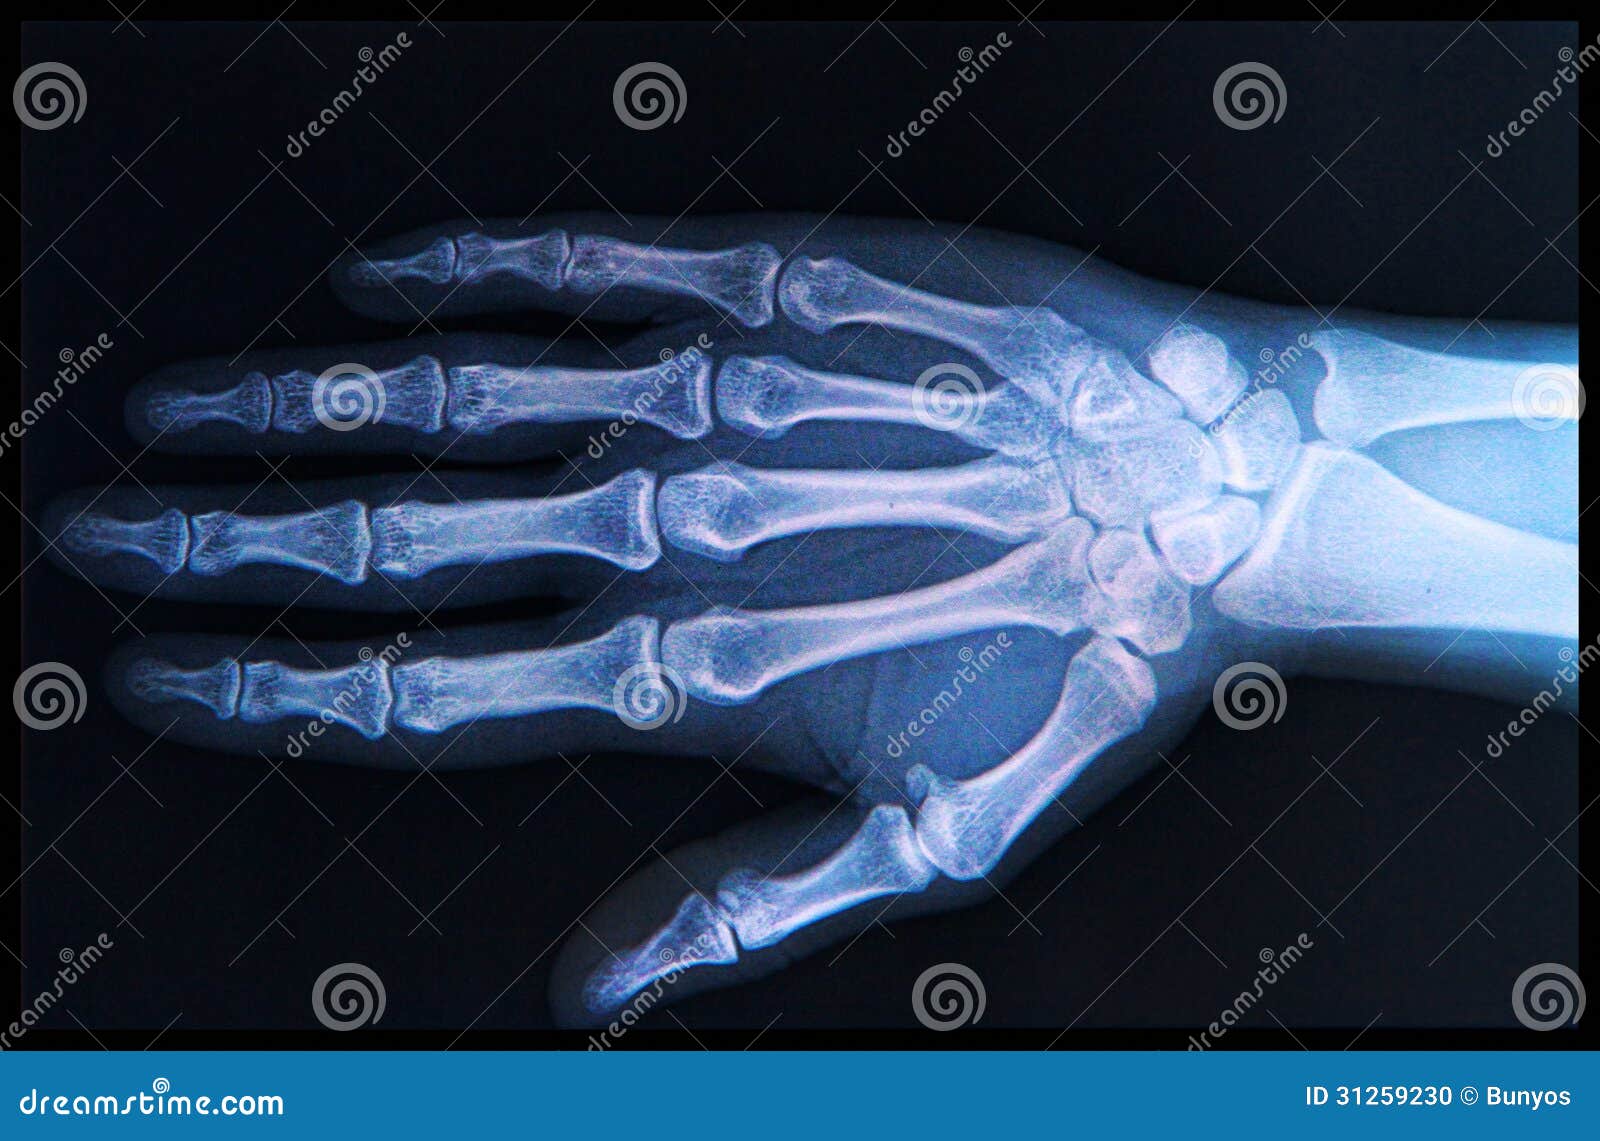 x-ray of hand and fingers